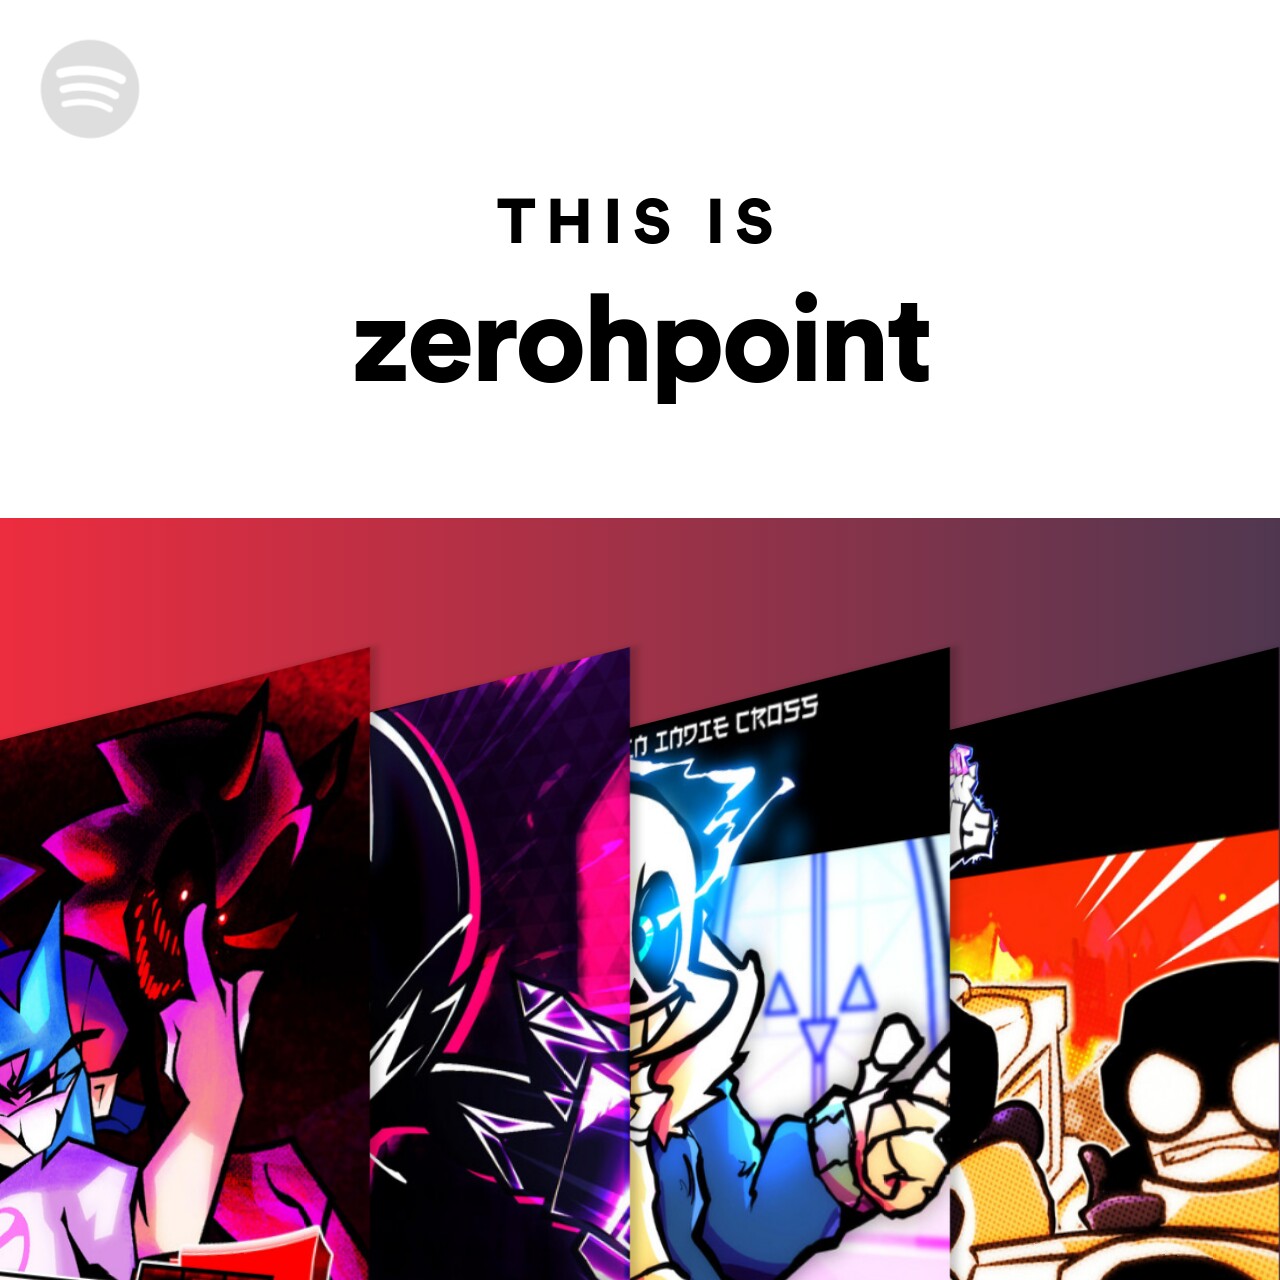 This Is zerohpoint